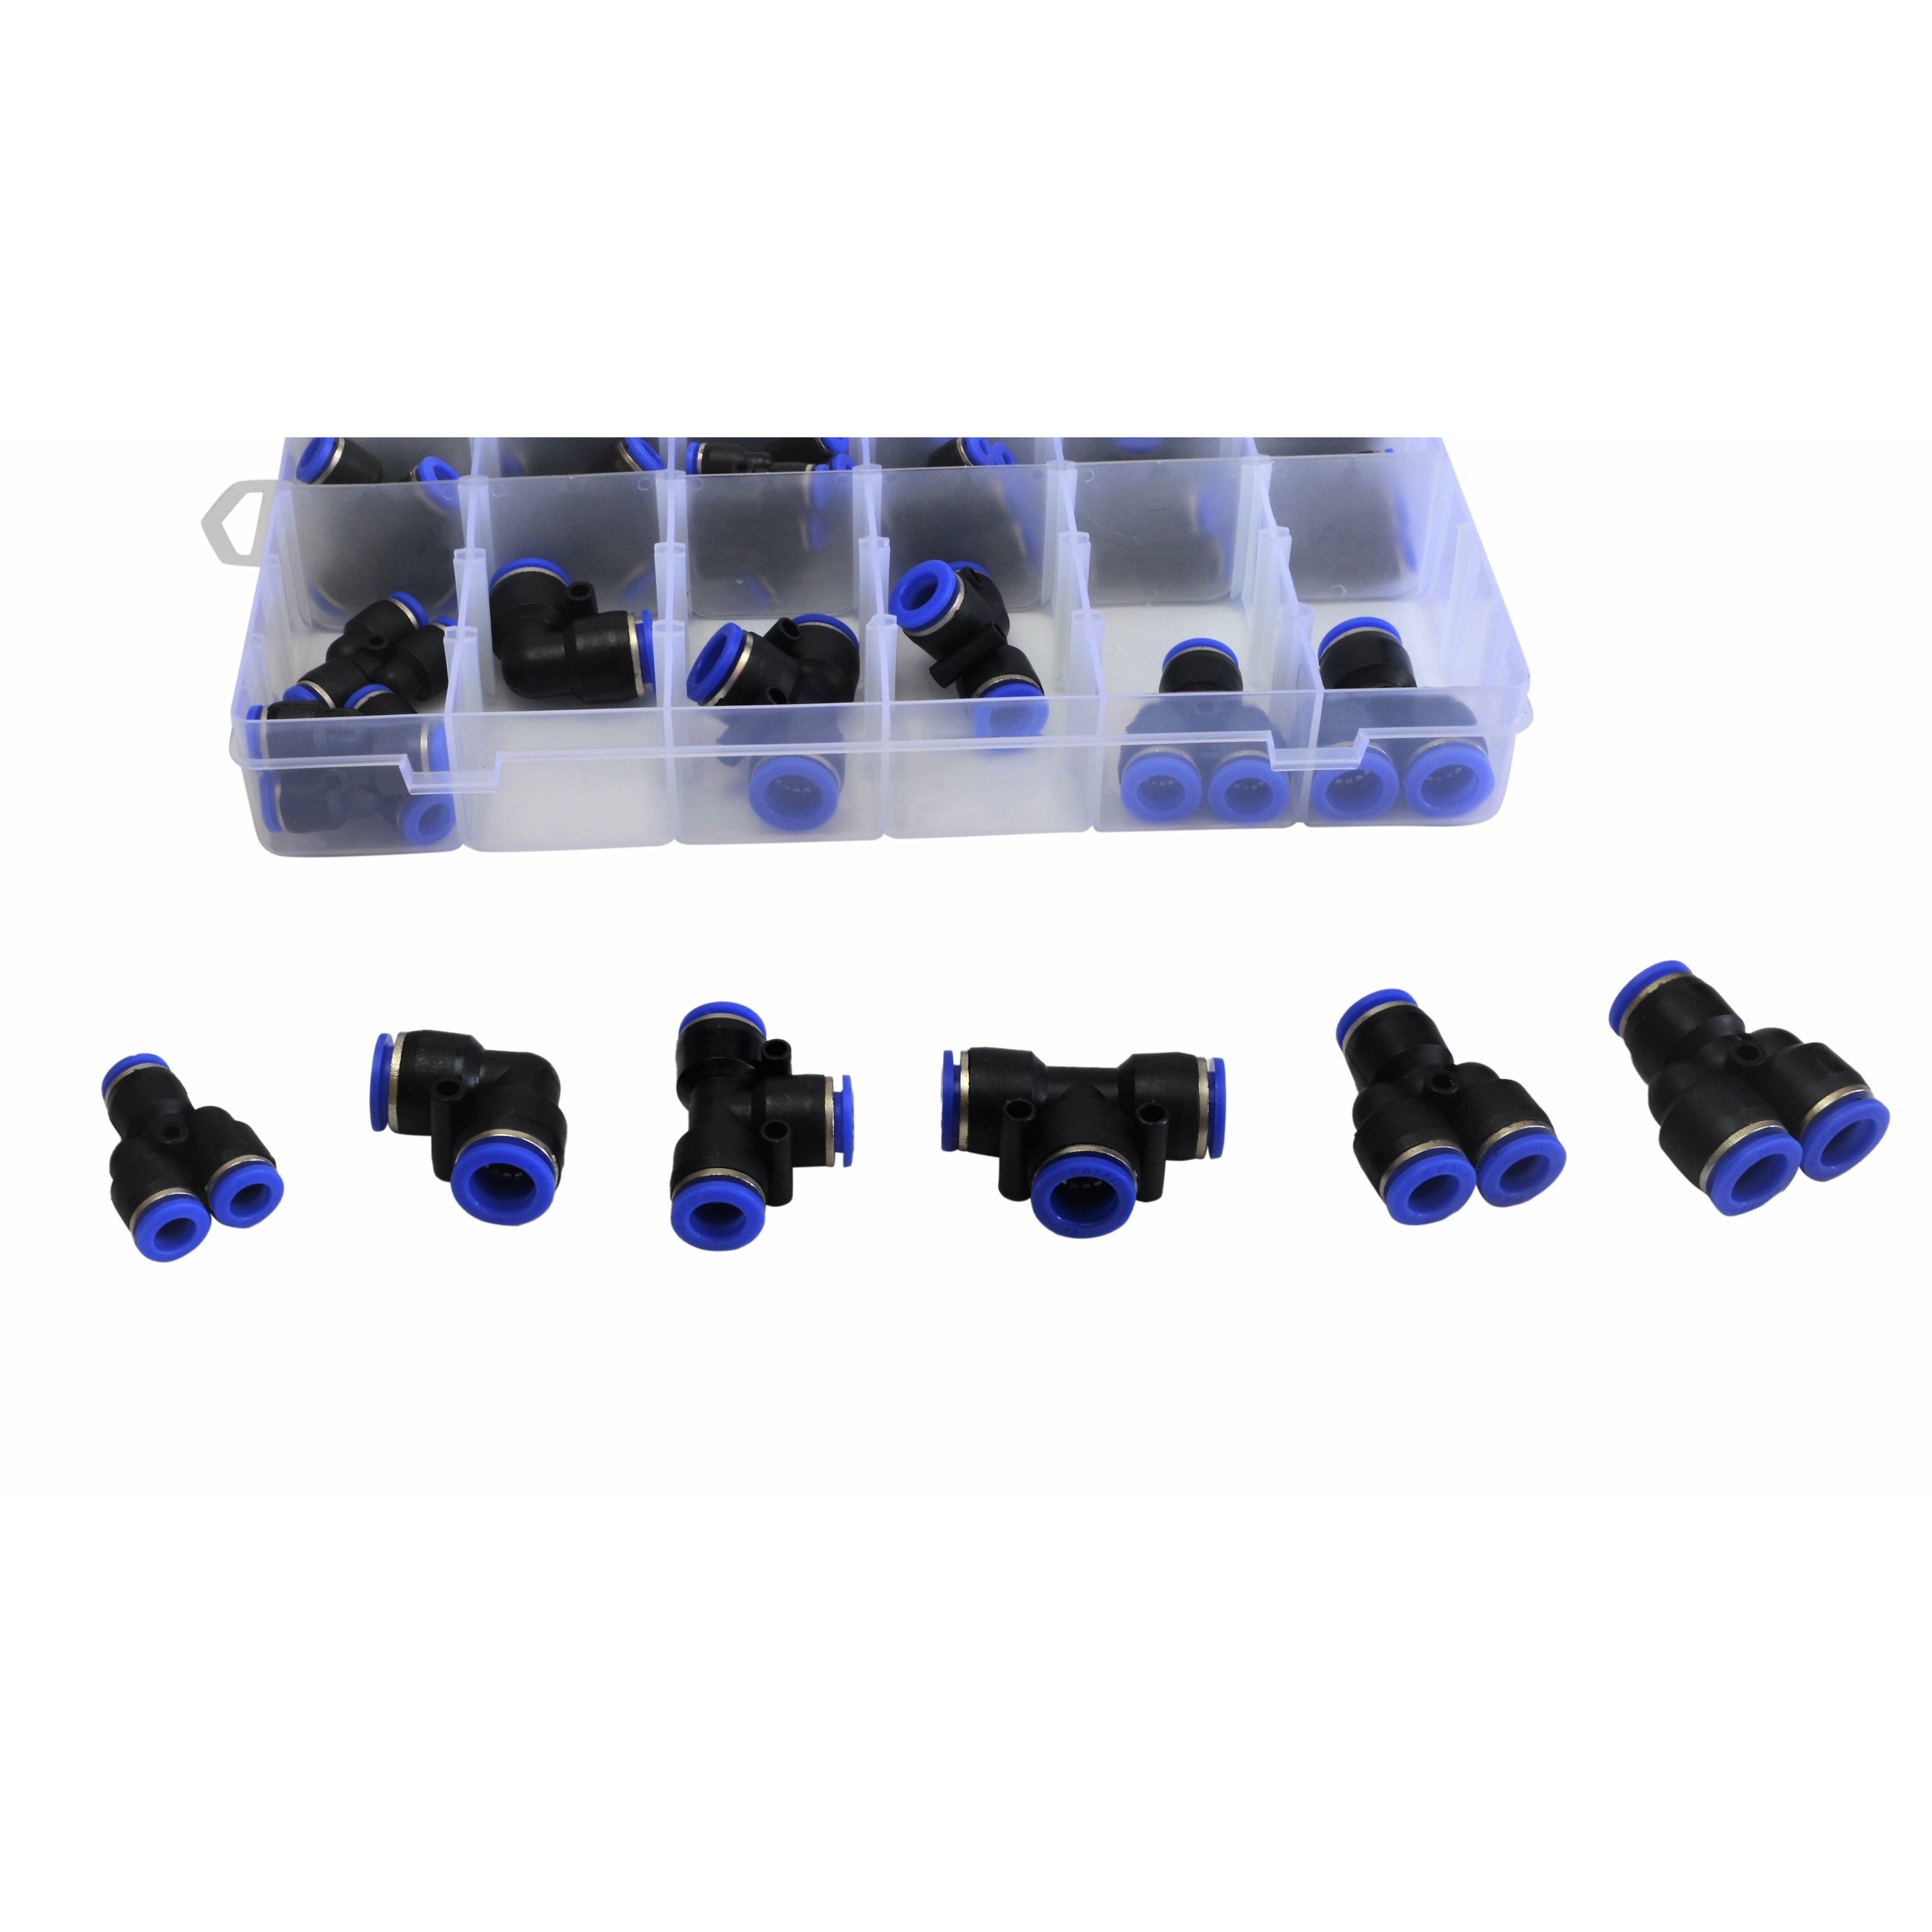 118 Piece Pneumatic Push in Air Line Hose Joiner Grab Kits Assortment